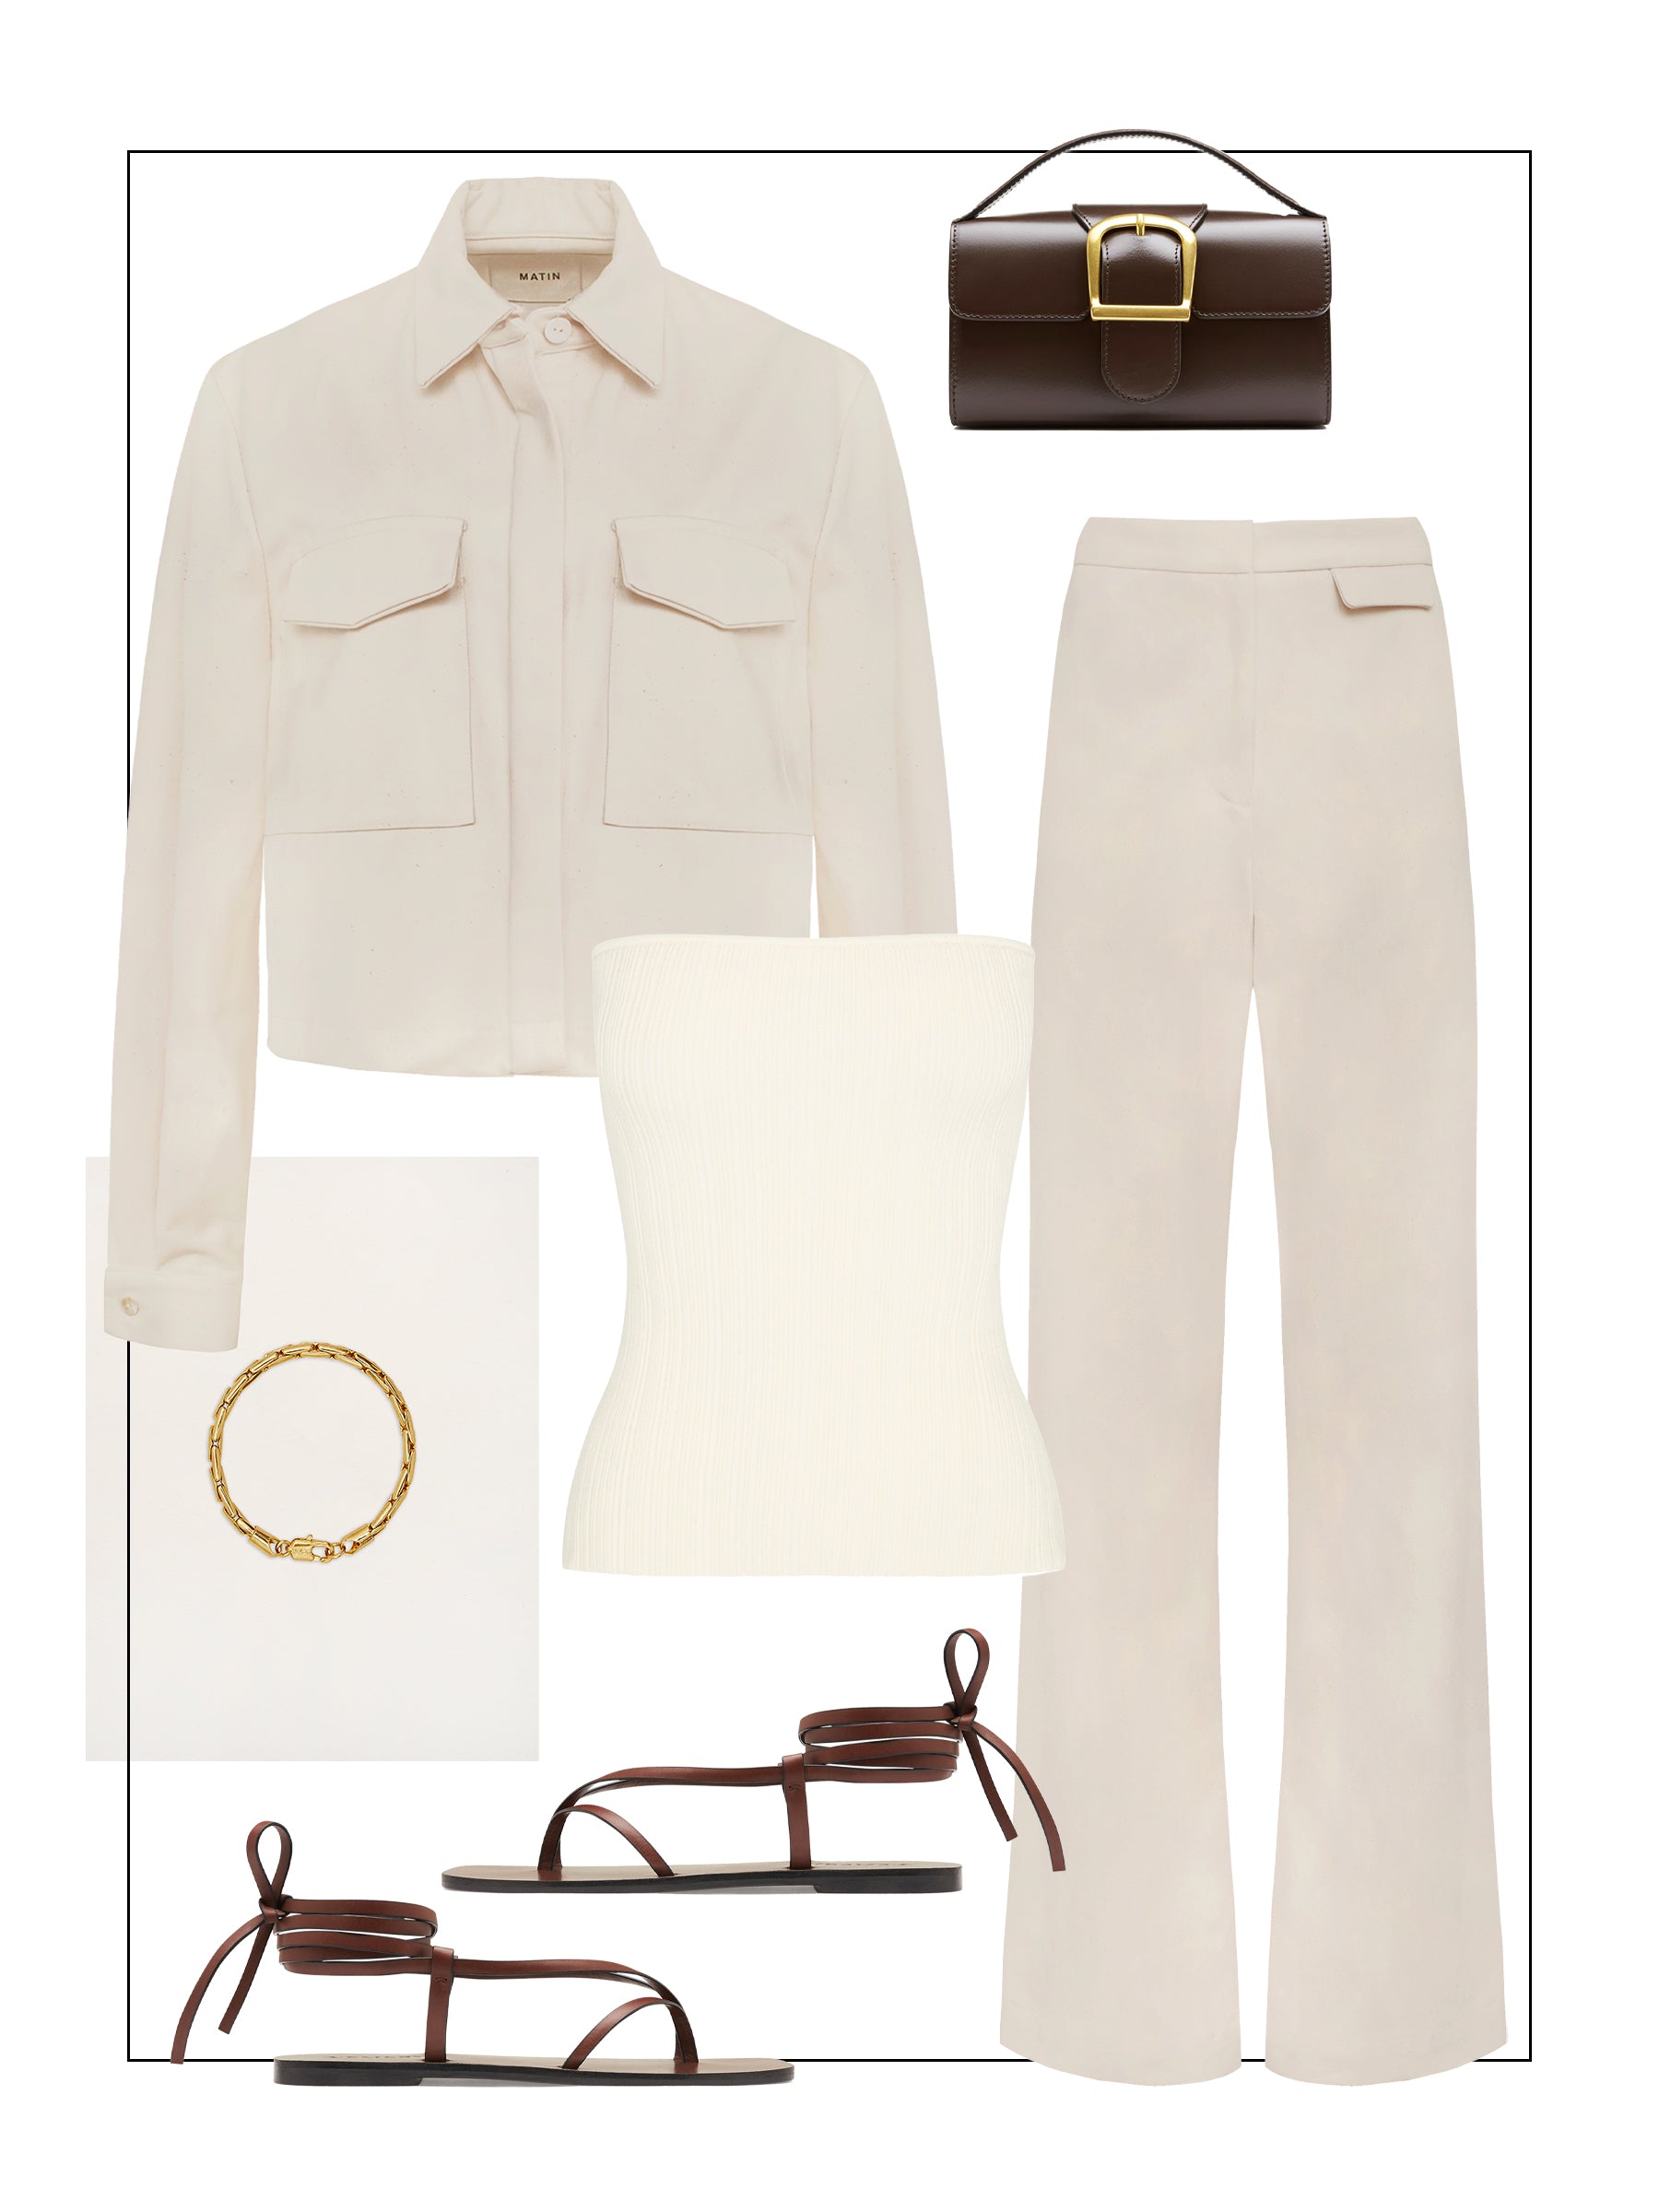 Neutral jacket and neutral trousers